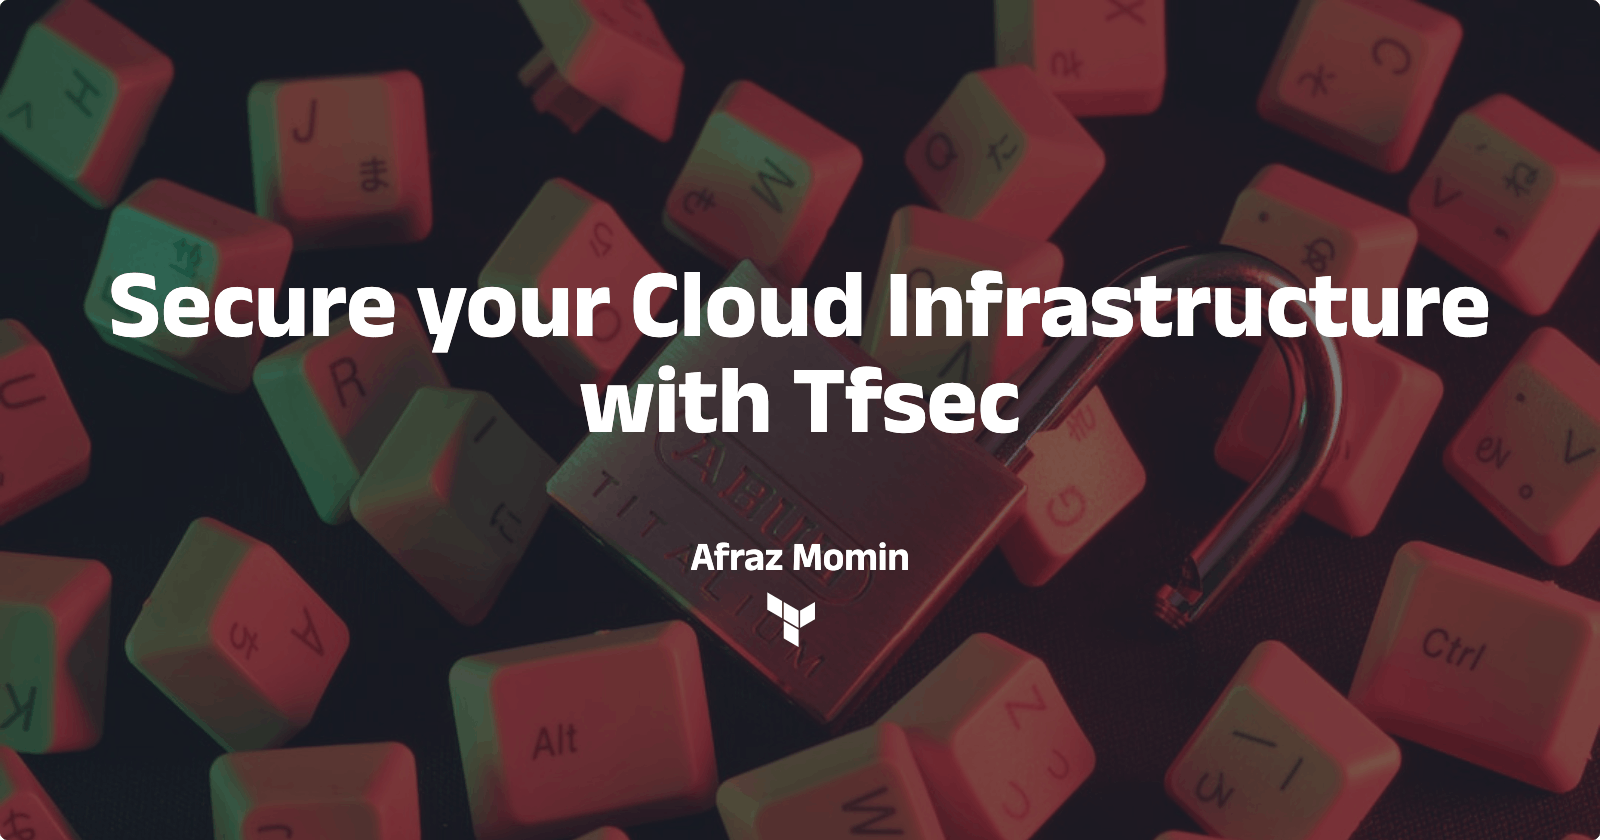 Secure your Cloud Infrastructure with tfsec